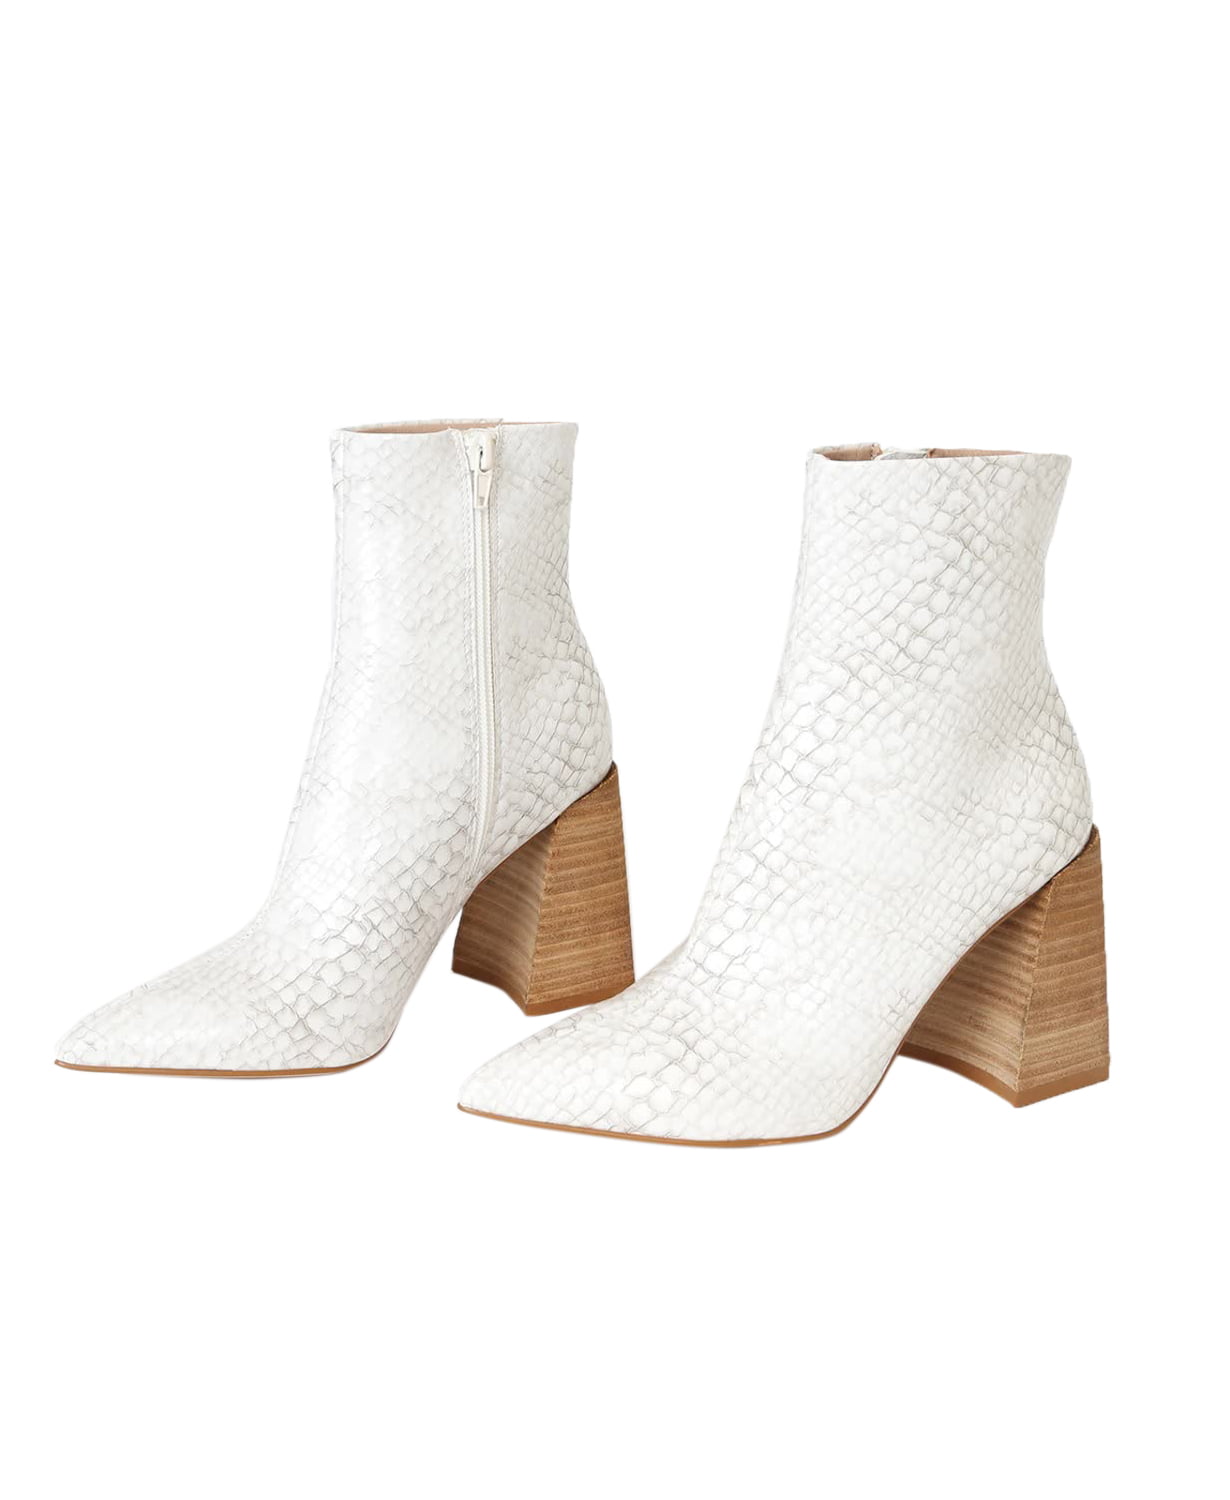 www.couturepoint.com-steve-madden-womens-white-grey-snake-print-envied-block-heel-booties